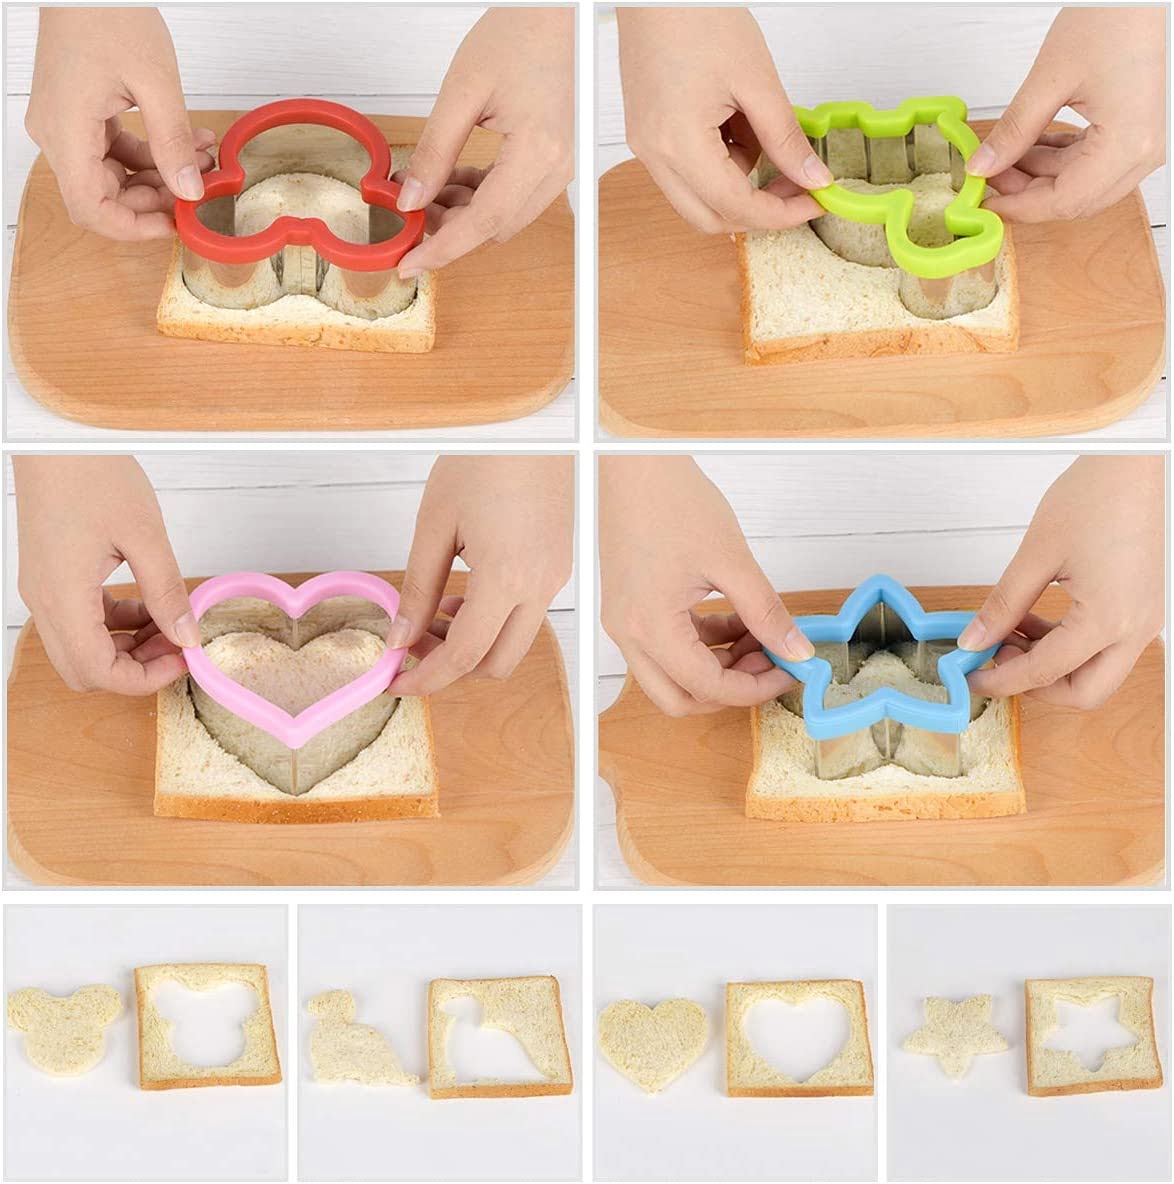 Kids Sandwich Cutters Set - Cookie, Vegetable, Fruits Shapes Food Mold